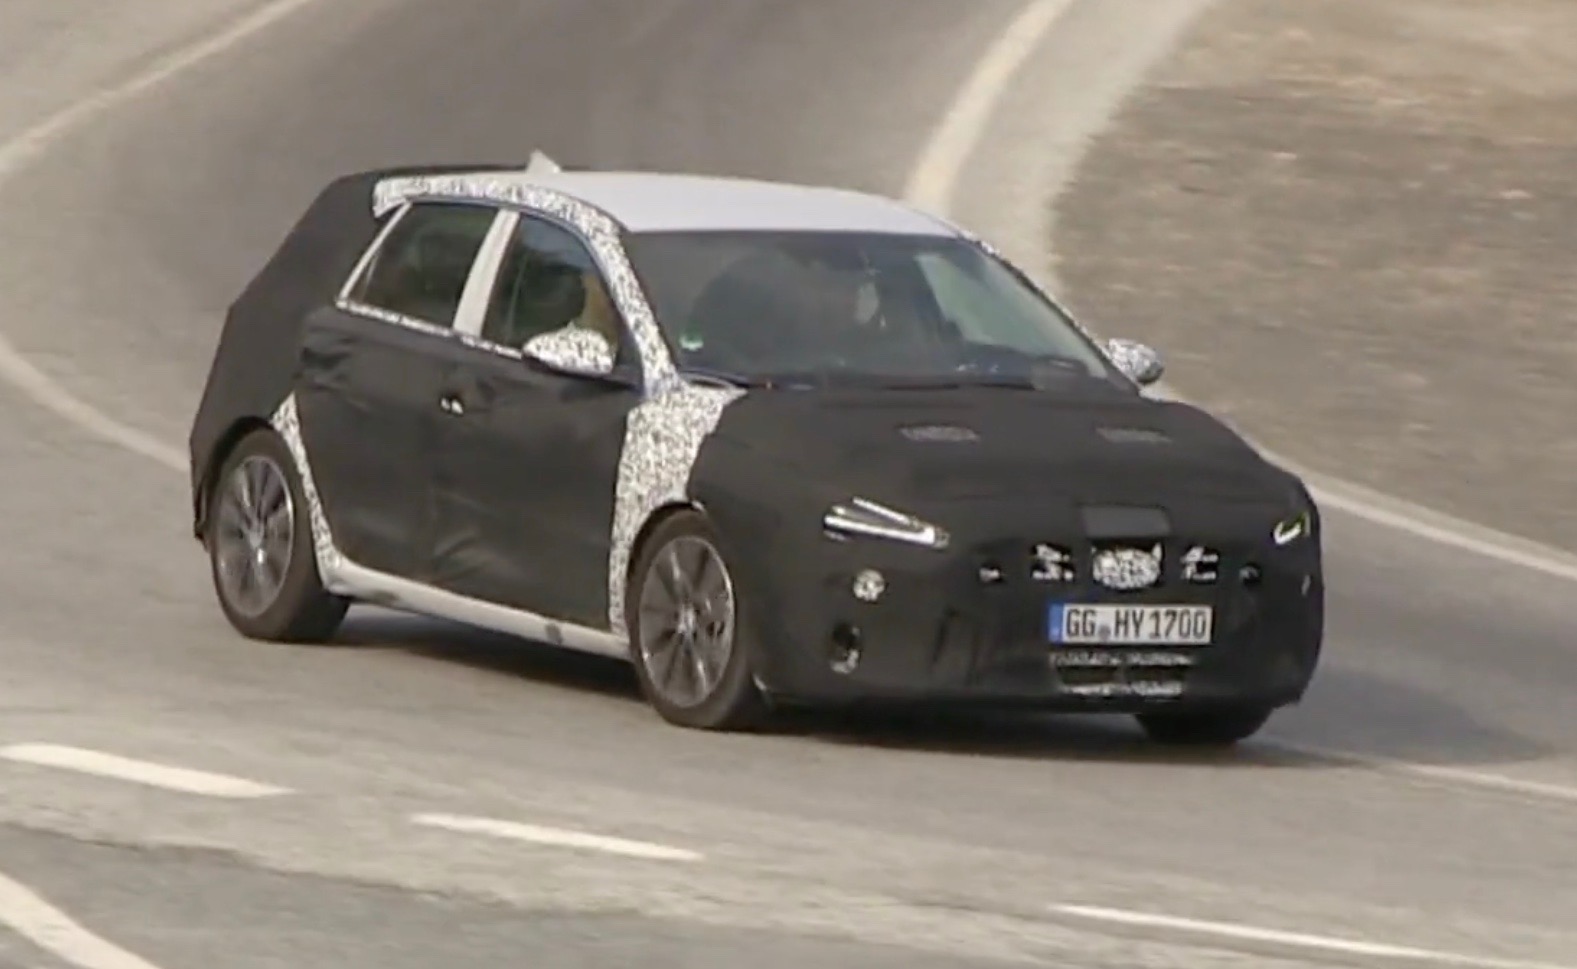 2021 Hyundai i30 prototype spotted, hides new-look design (video)